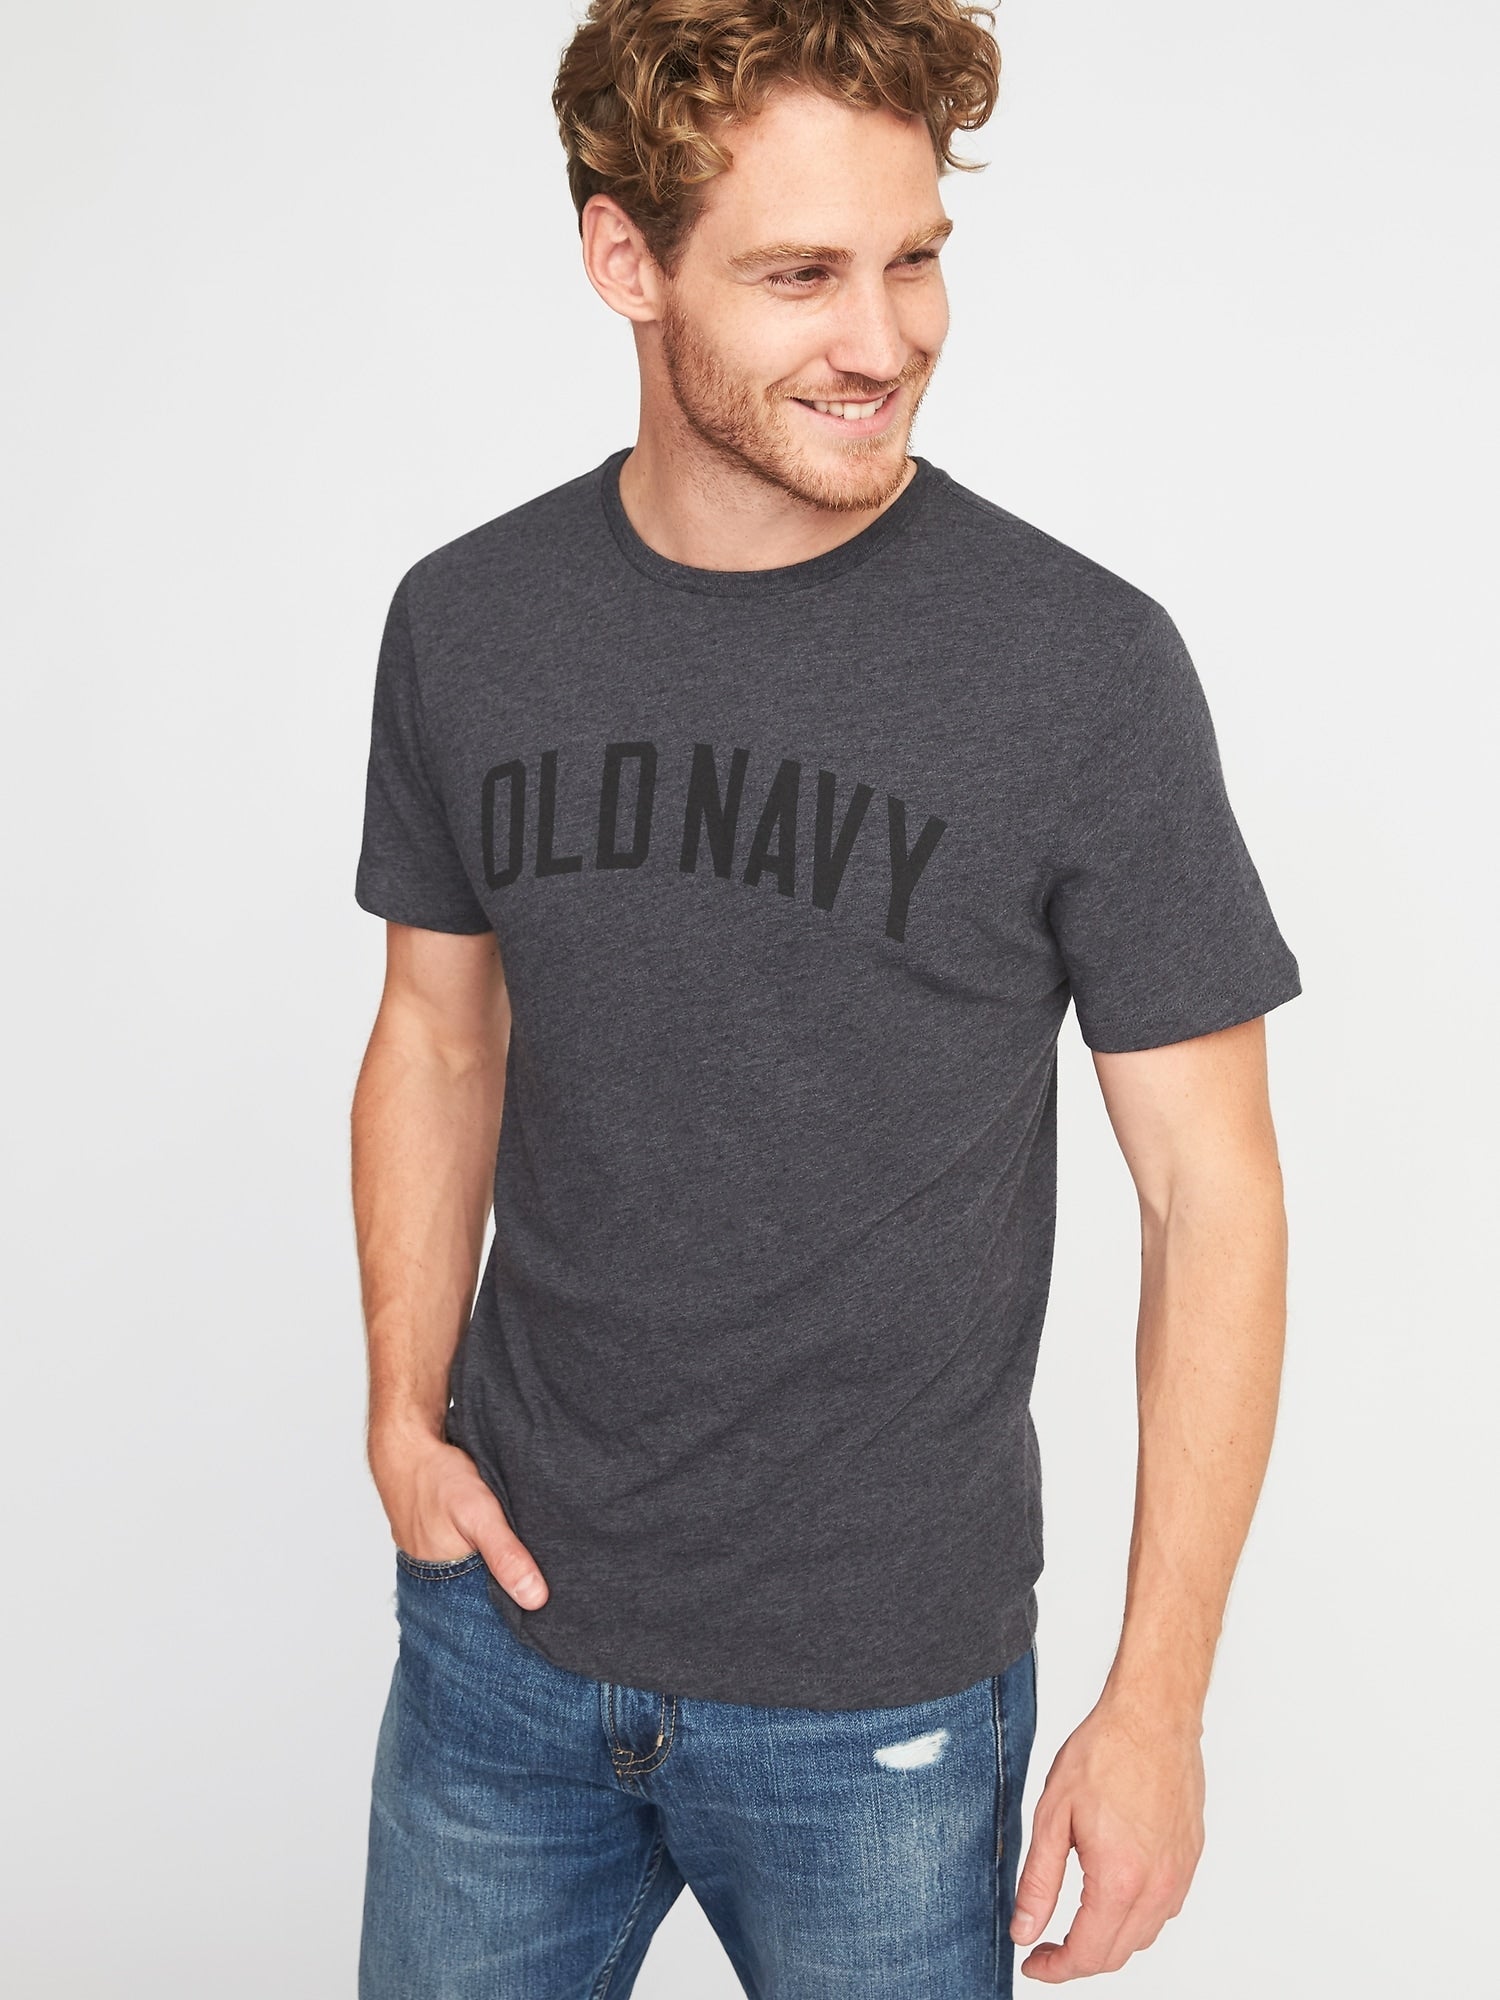 Men's T-Shirts Old Navy Philippines